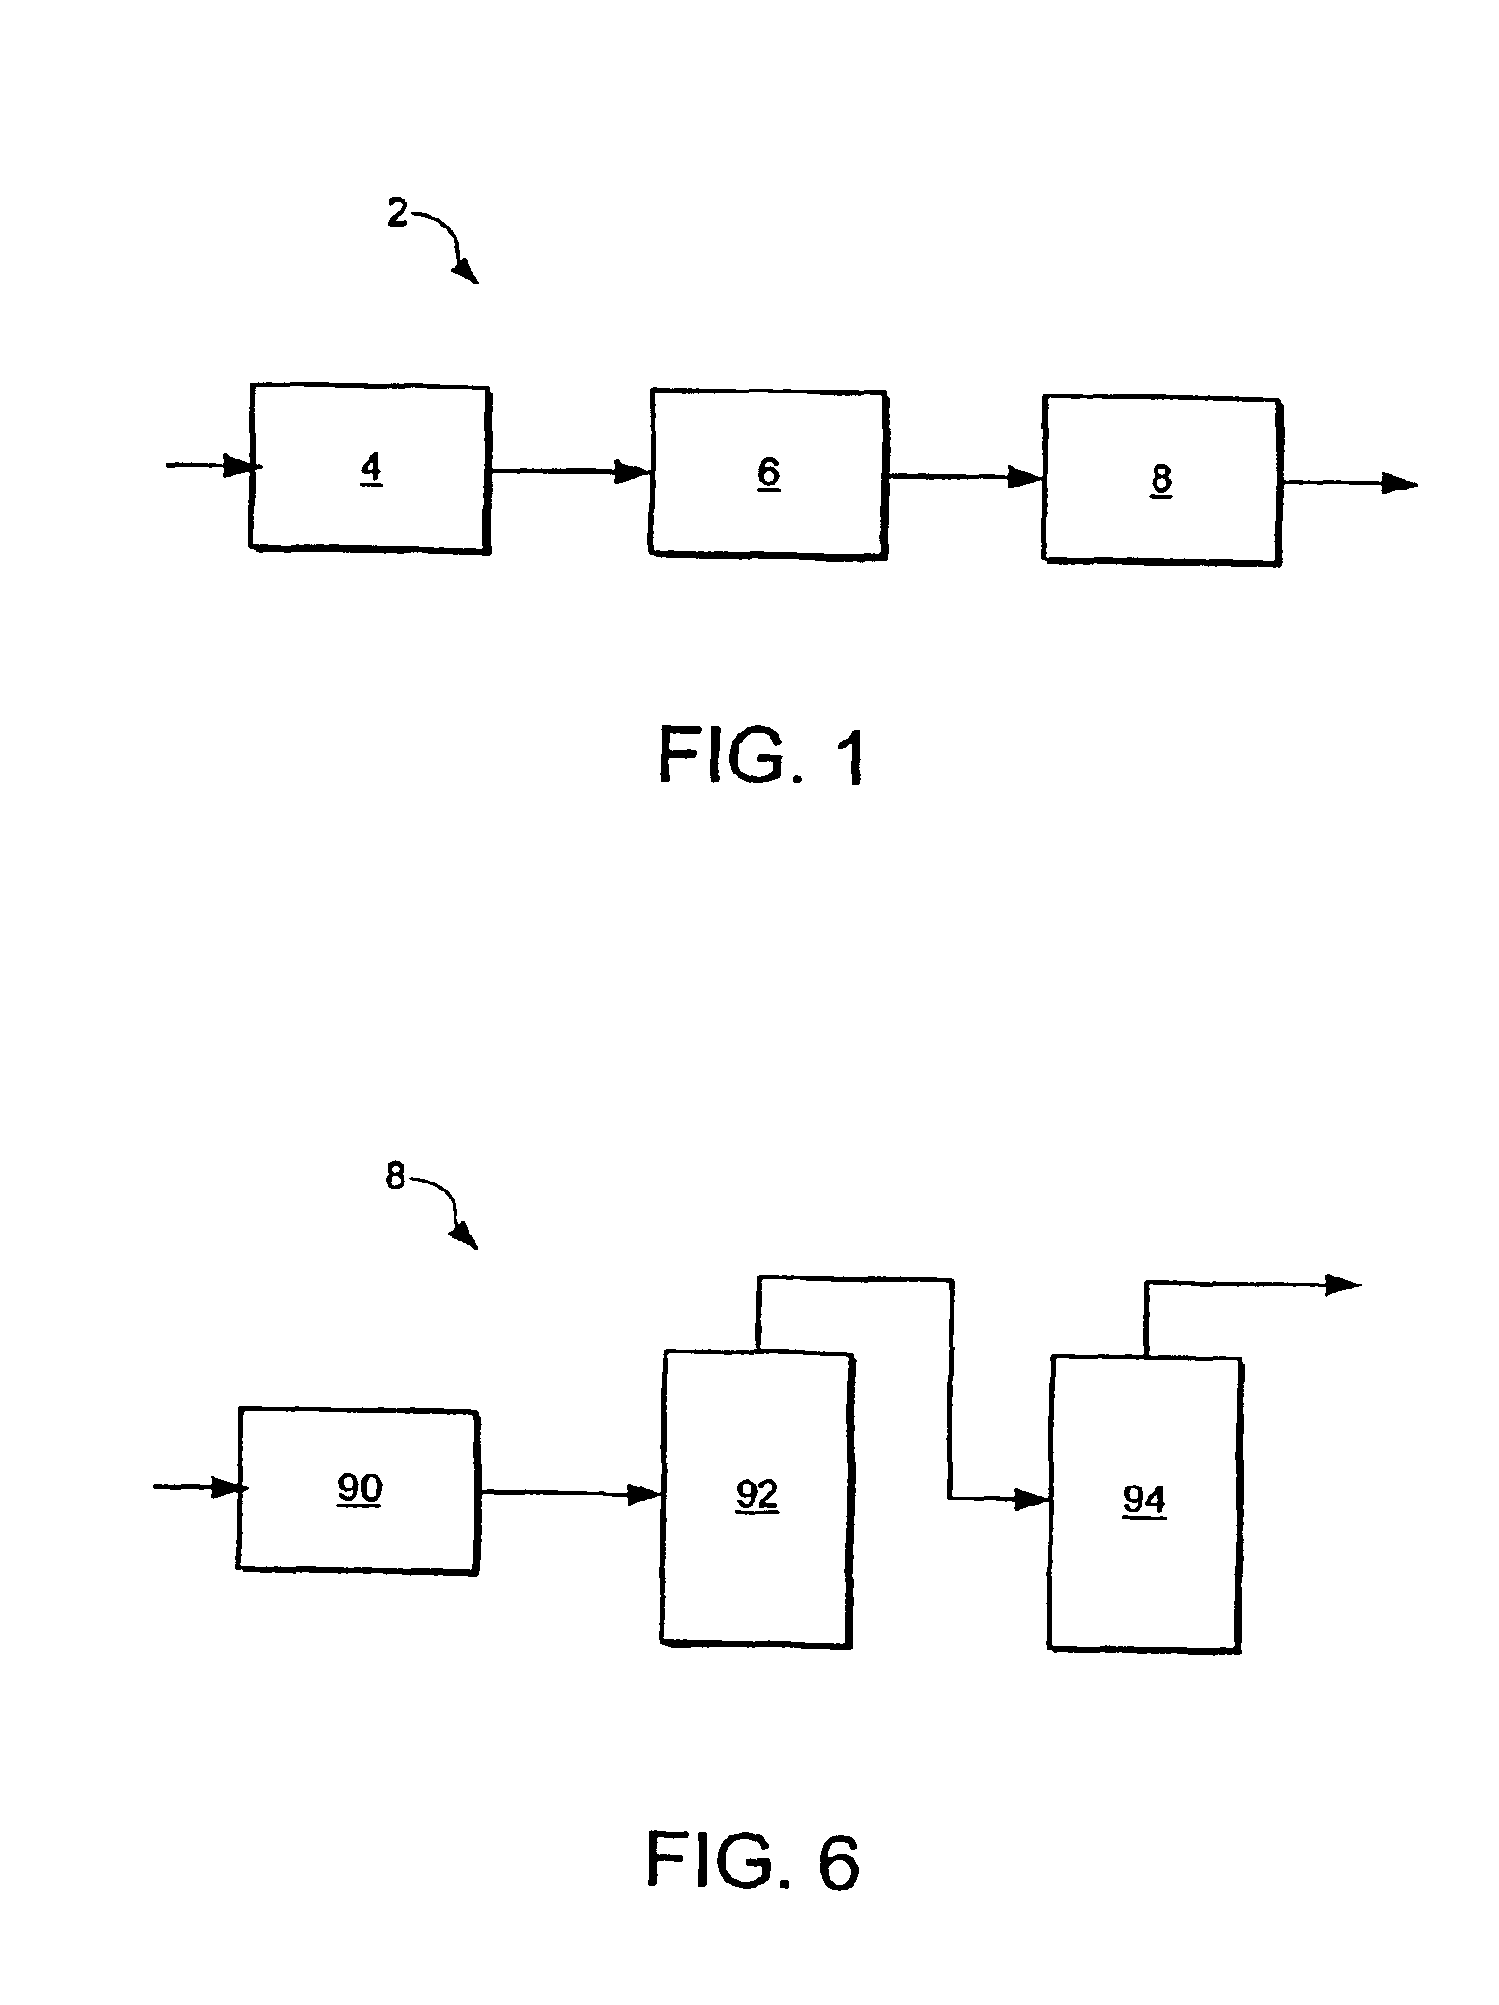 Process and apparatus for recovering sulphur from a gas stream containing sulphide